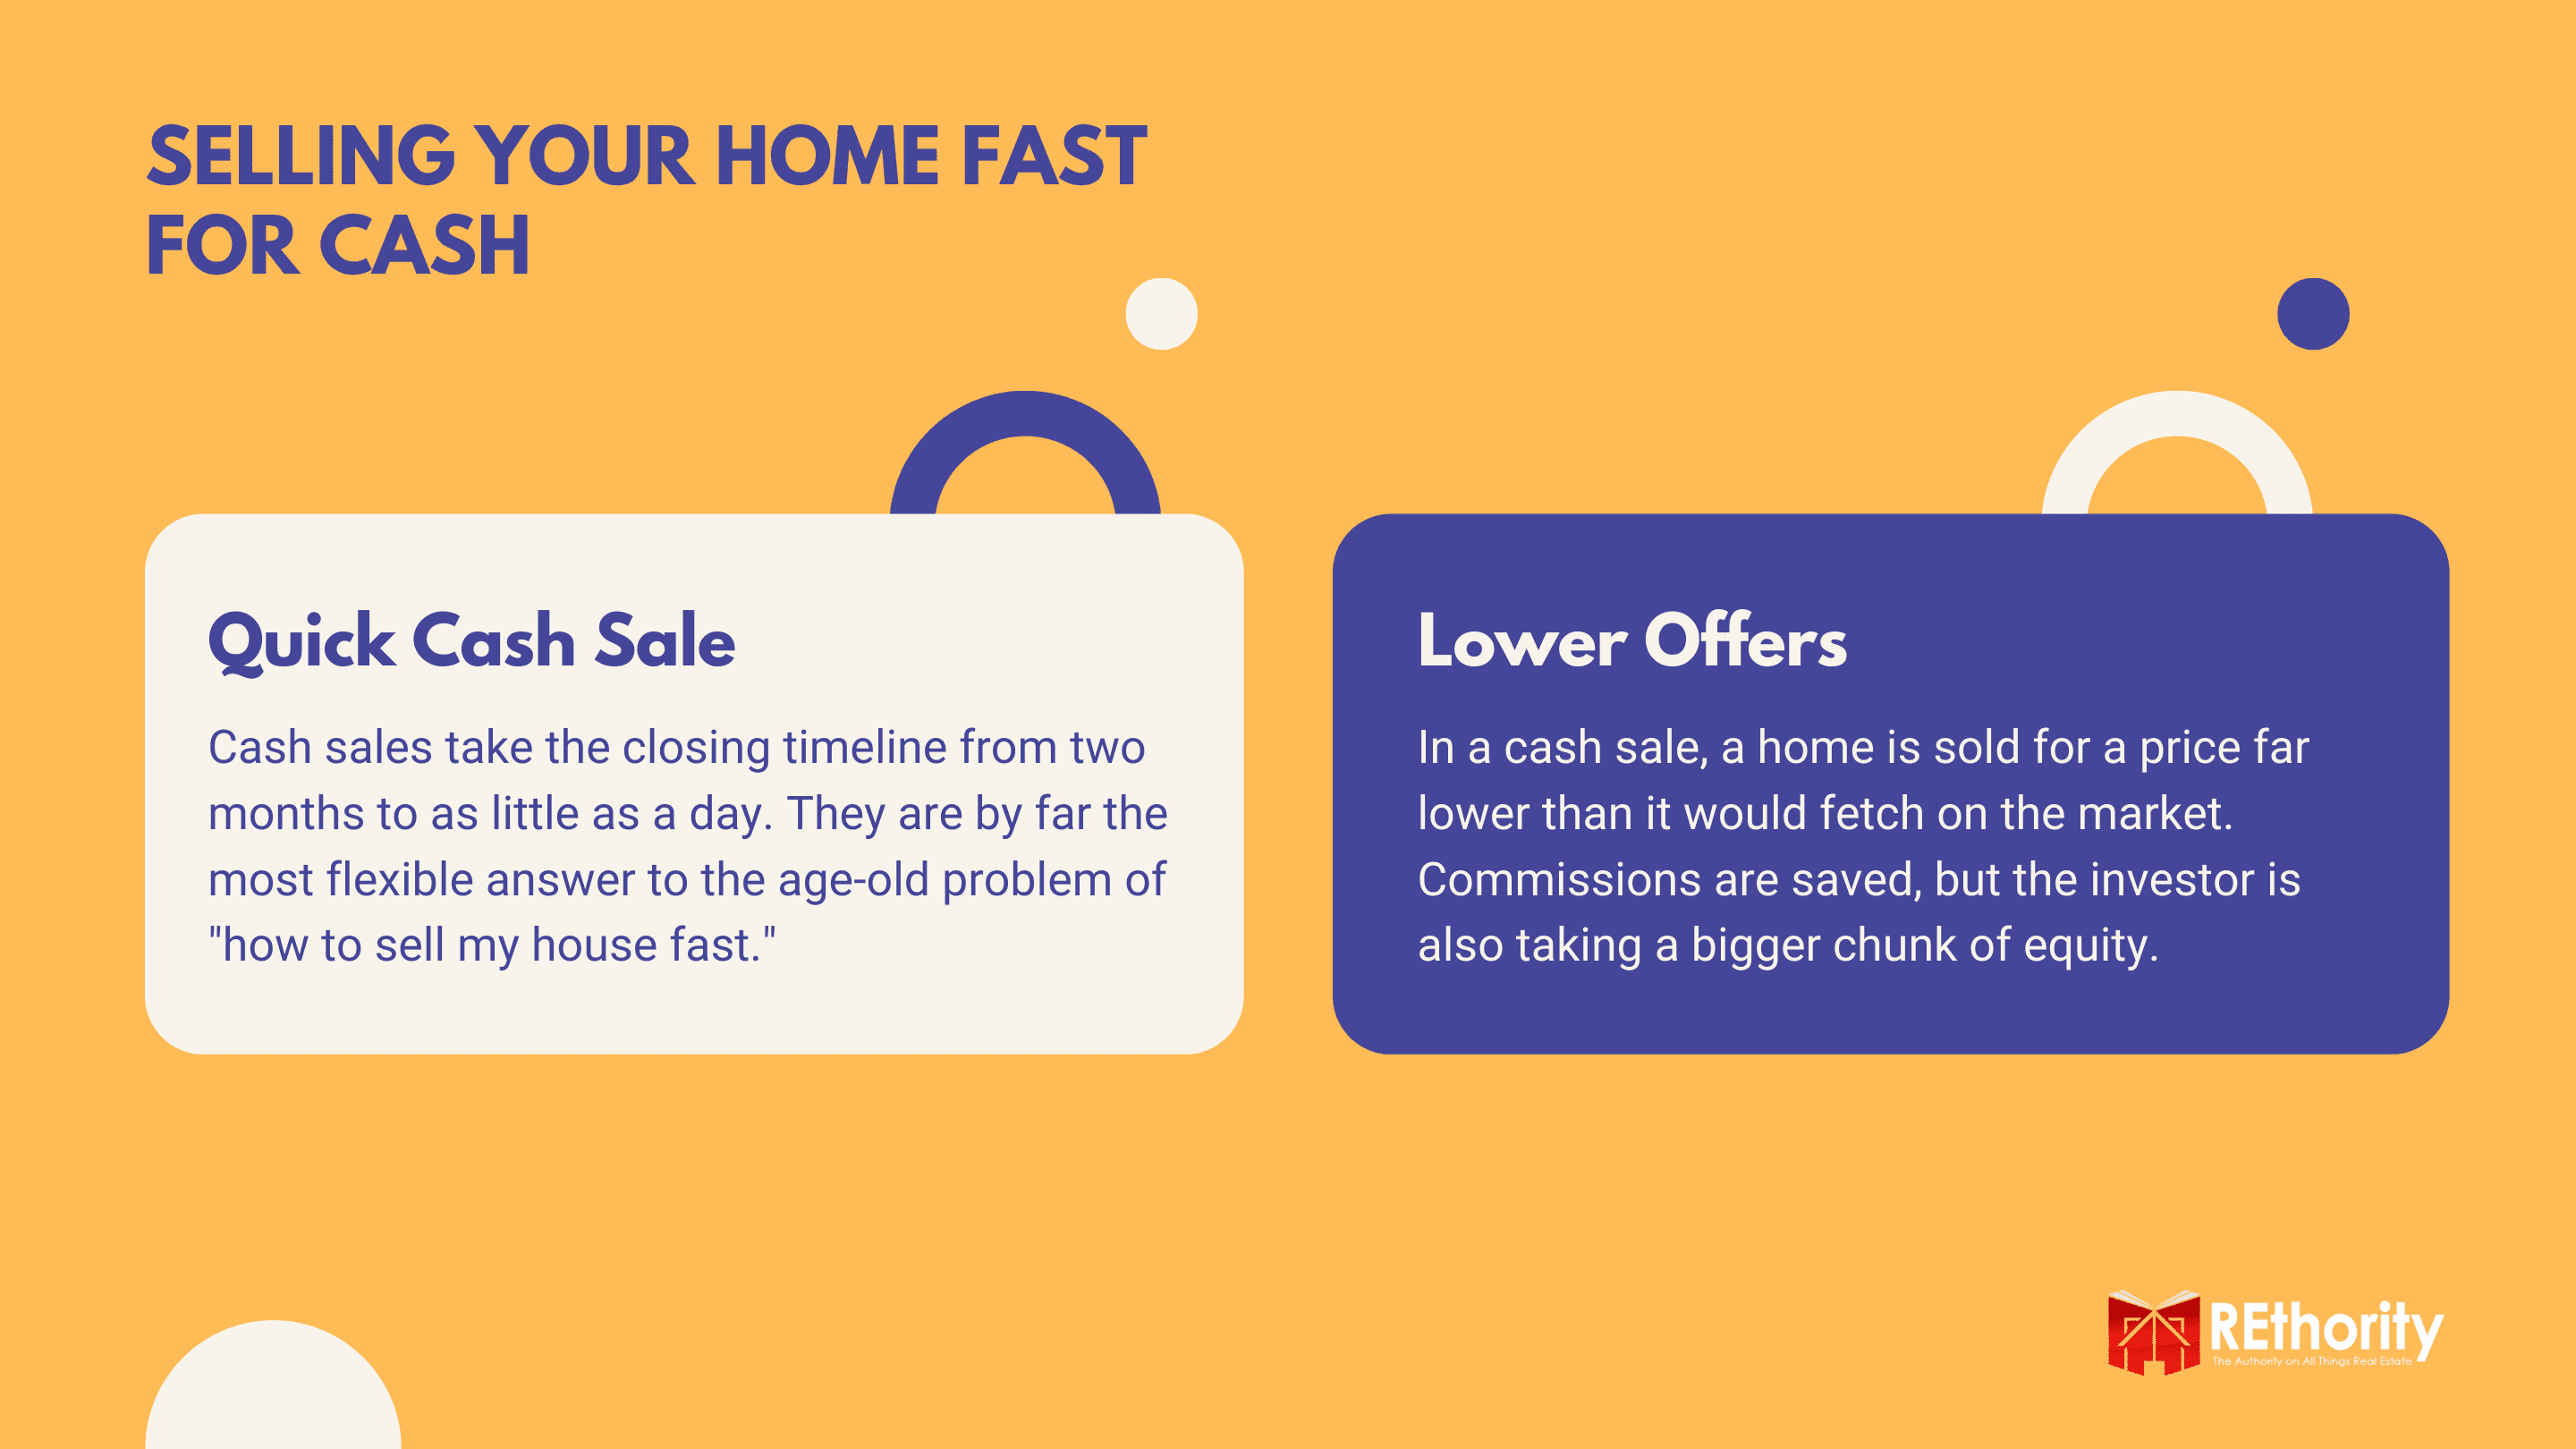 How to sell my house fast graphic explaining the benefits and cons of a cash home sale